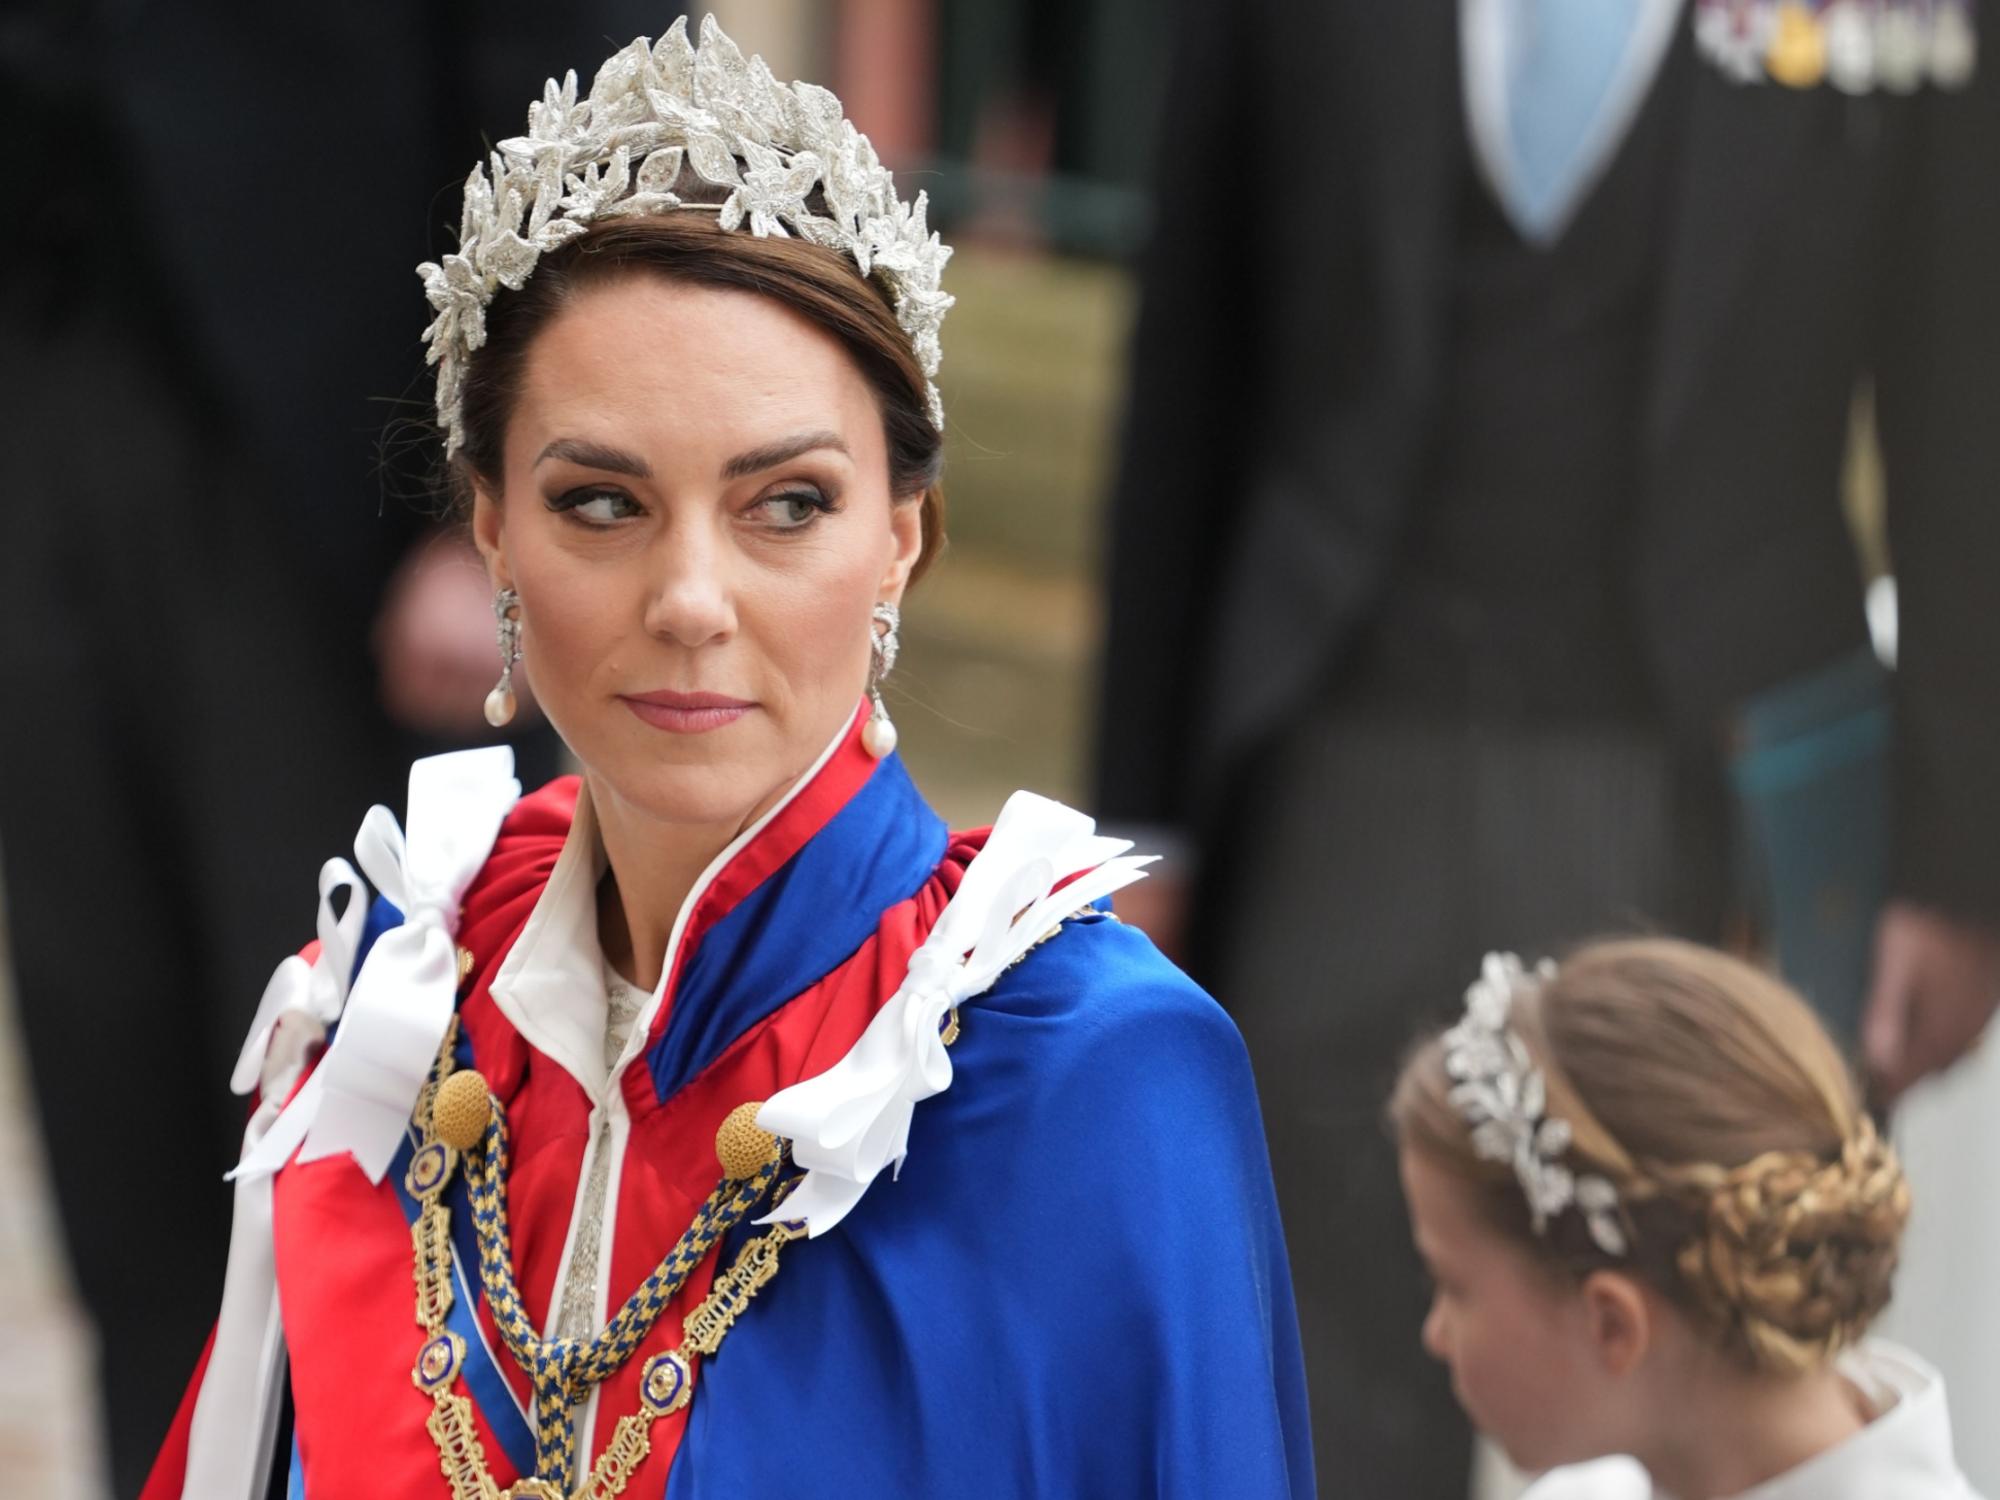 The hidden meaning behind the Princess of Wales's coronation outfit